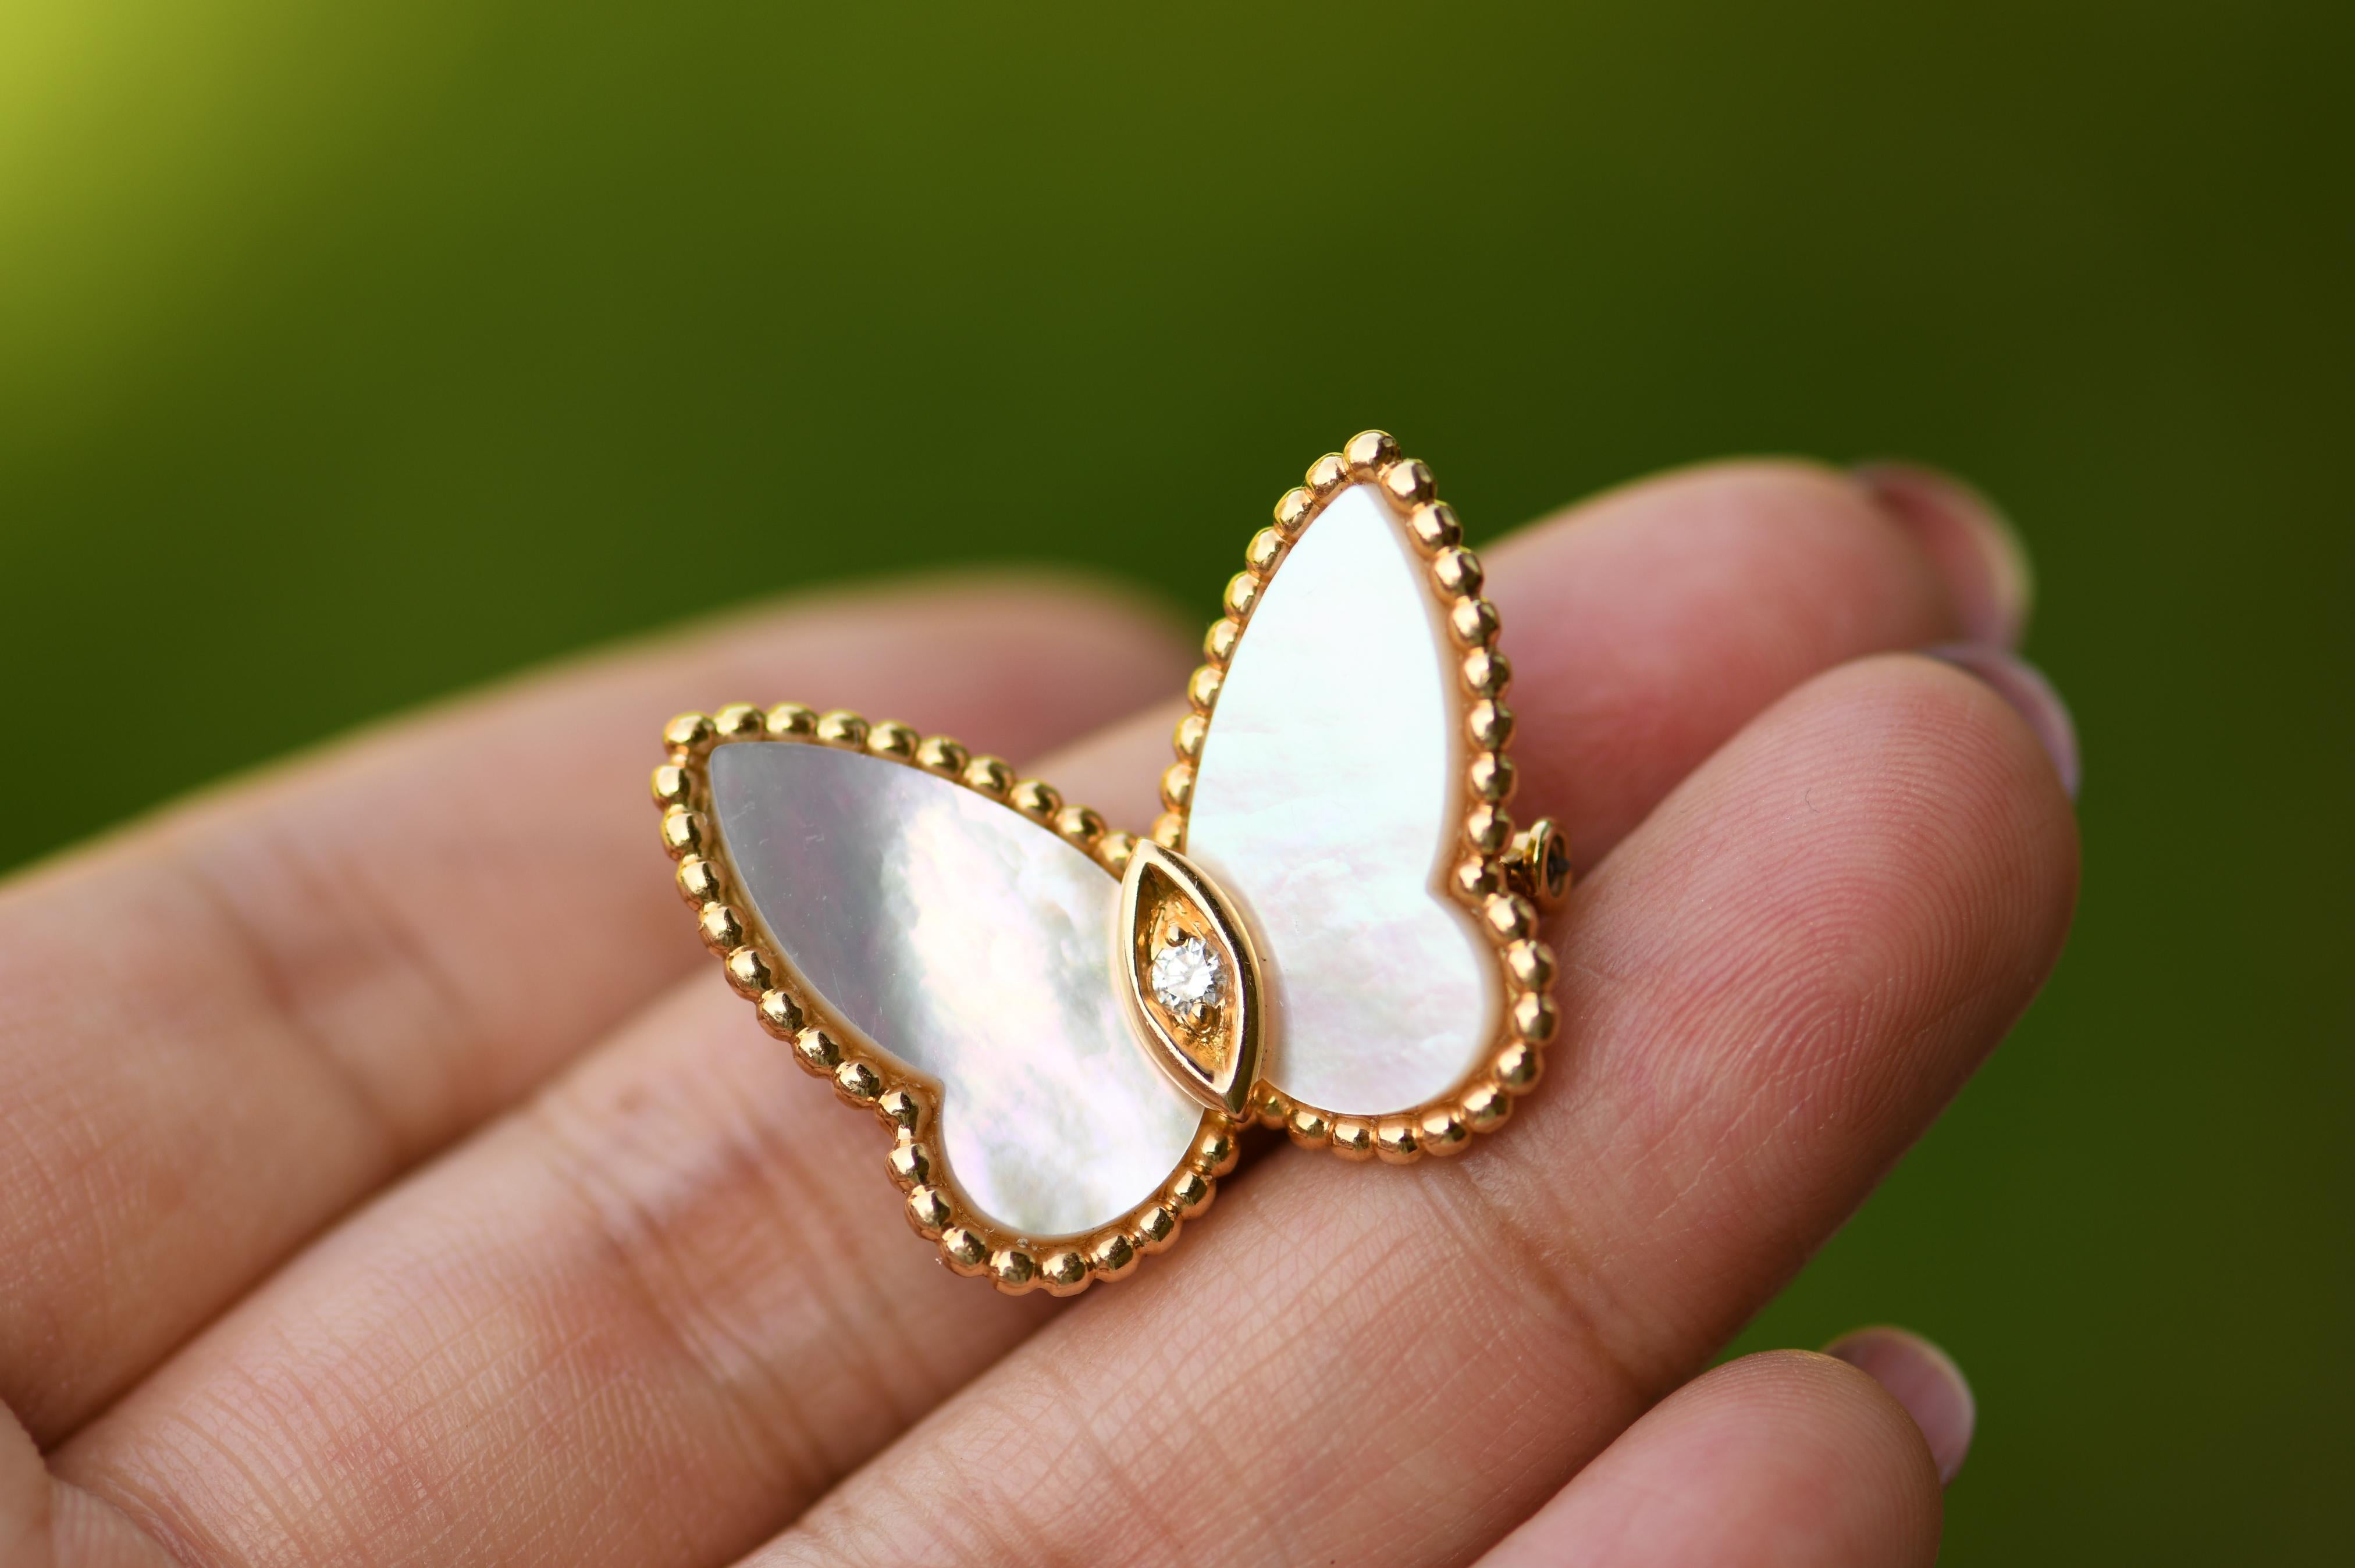  VCA iconic figural butterfly clip brooch with mother of pearl & diamonds, set in 18k yellow gold. 
Designer: Van Cleef & Arpels 
Signed and fully hallmarked. 

Dimension 
Size : 2.8 x 2.3 cm 
Weight : 8.8 grams 

Perfect condition